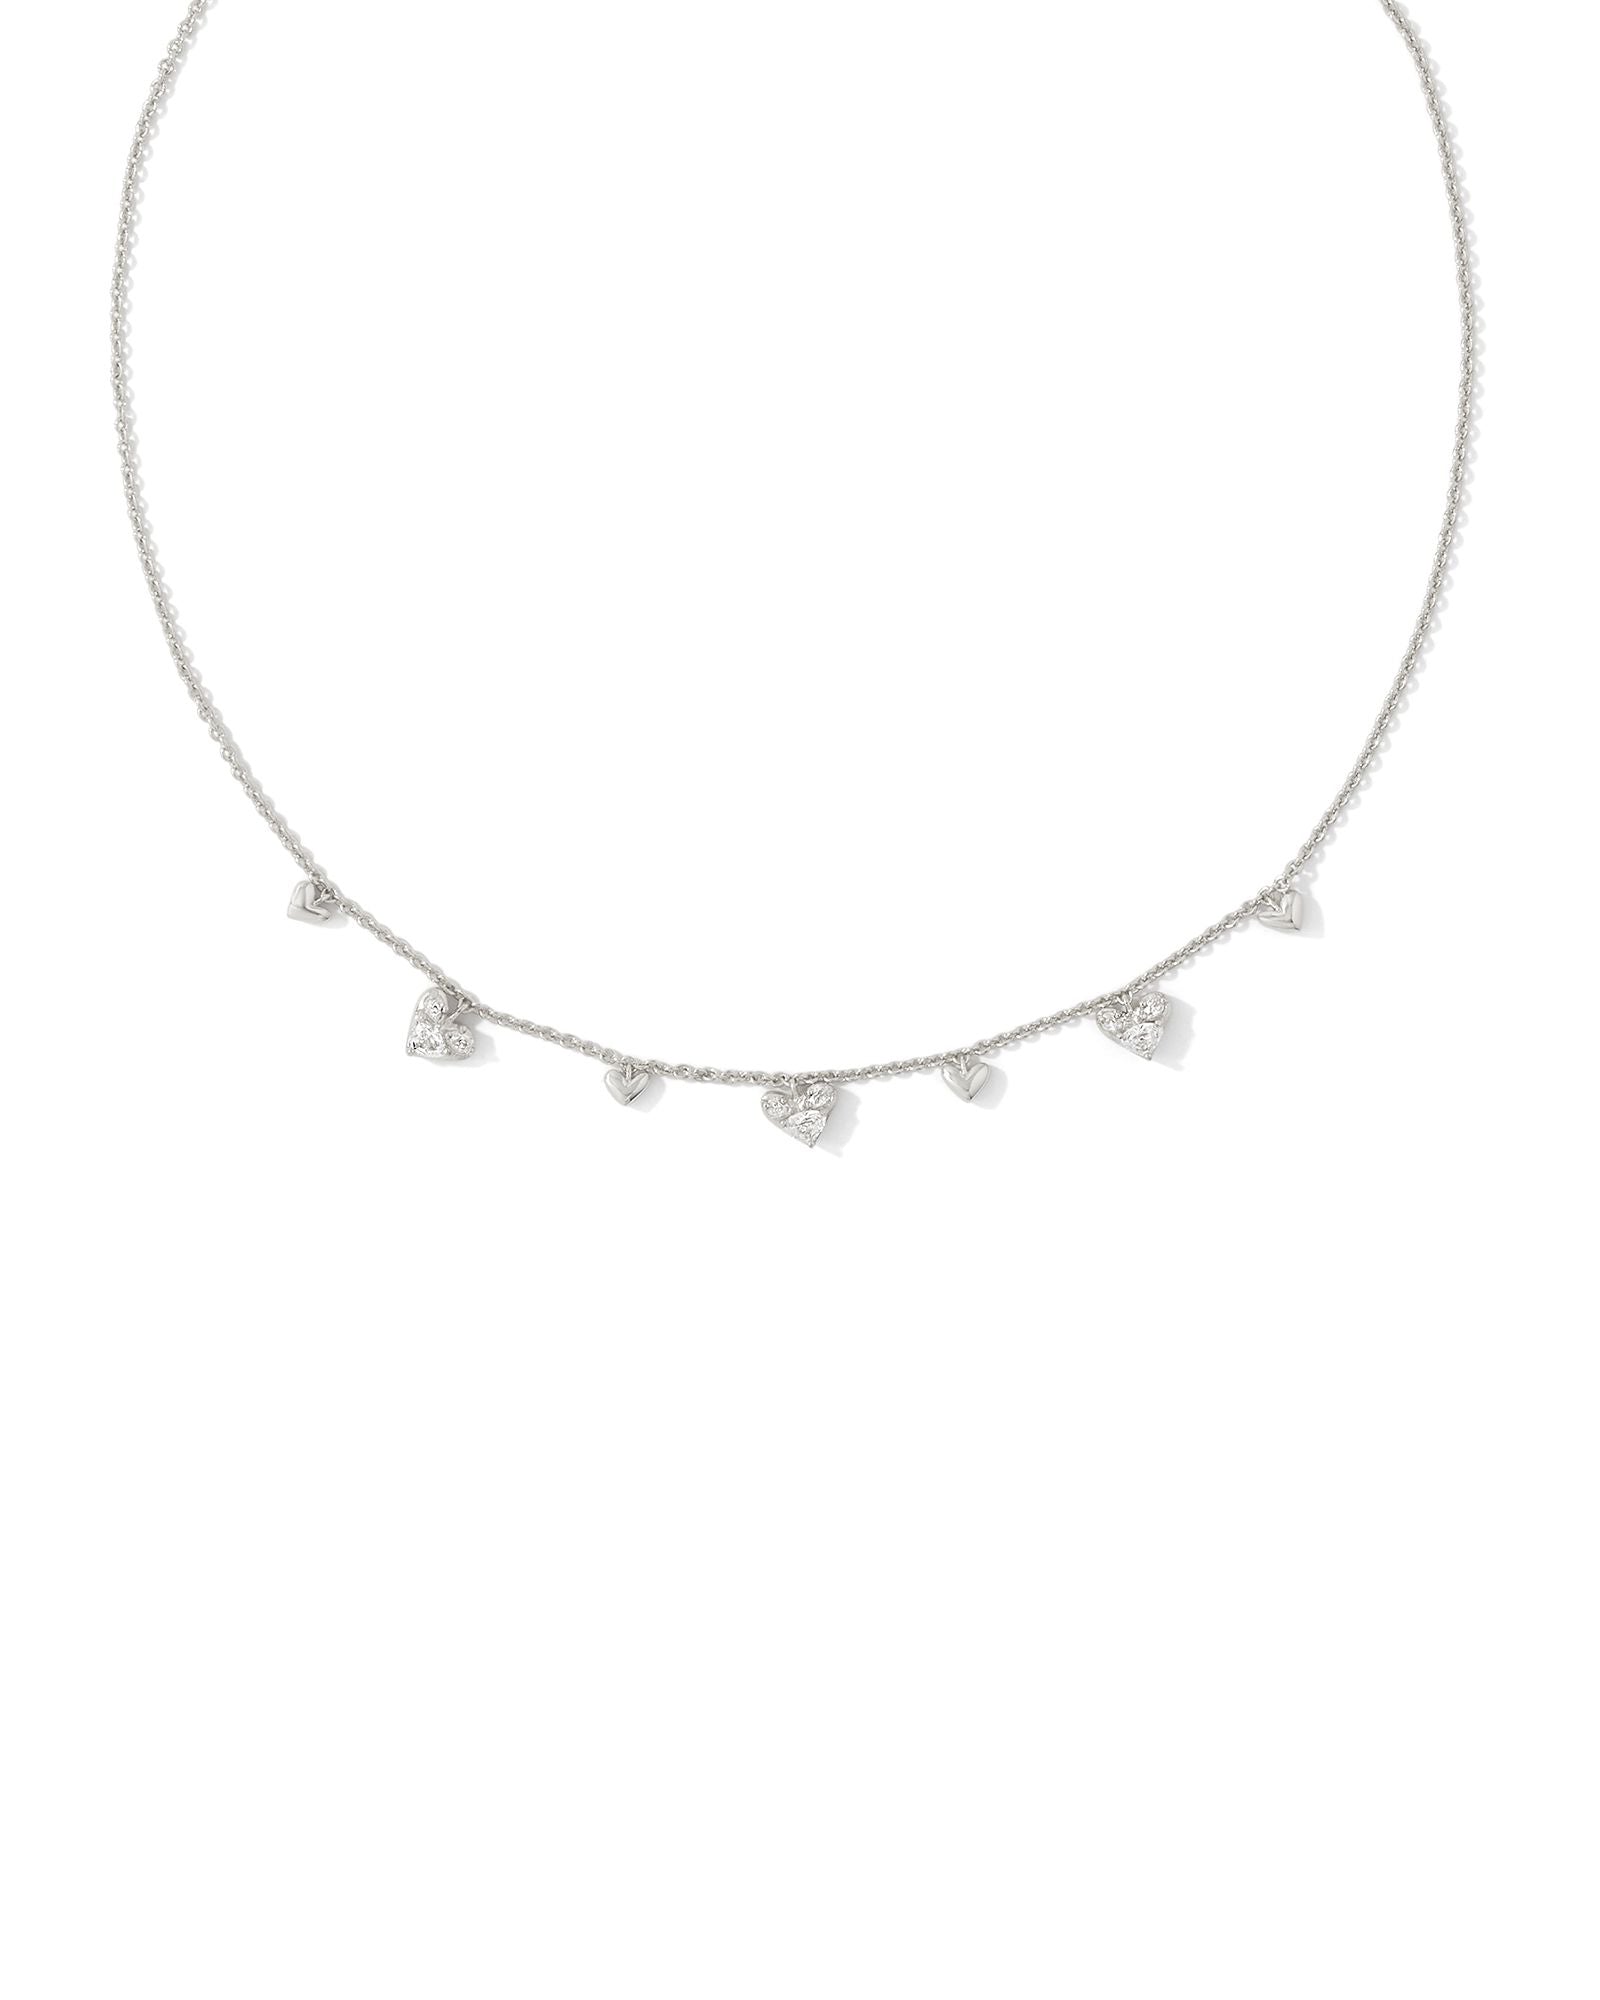 Sale Haven Silver Heart Crystal Choker Necklace White Crystal